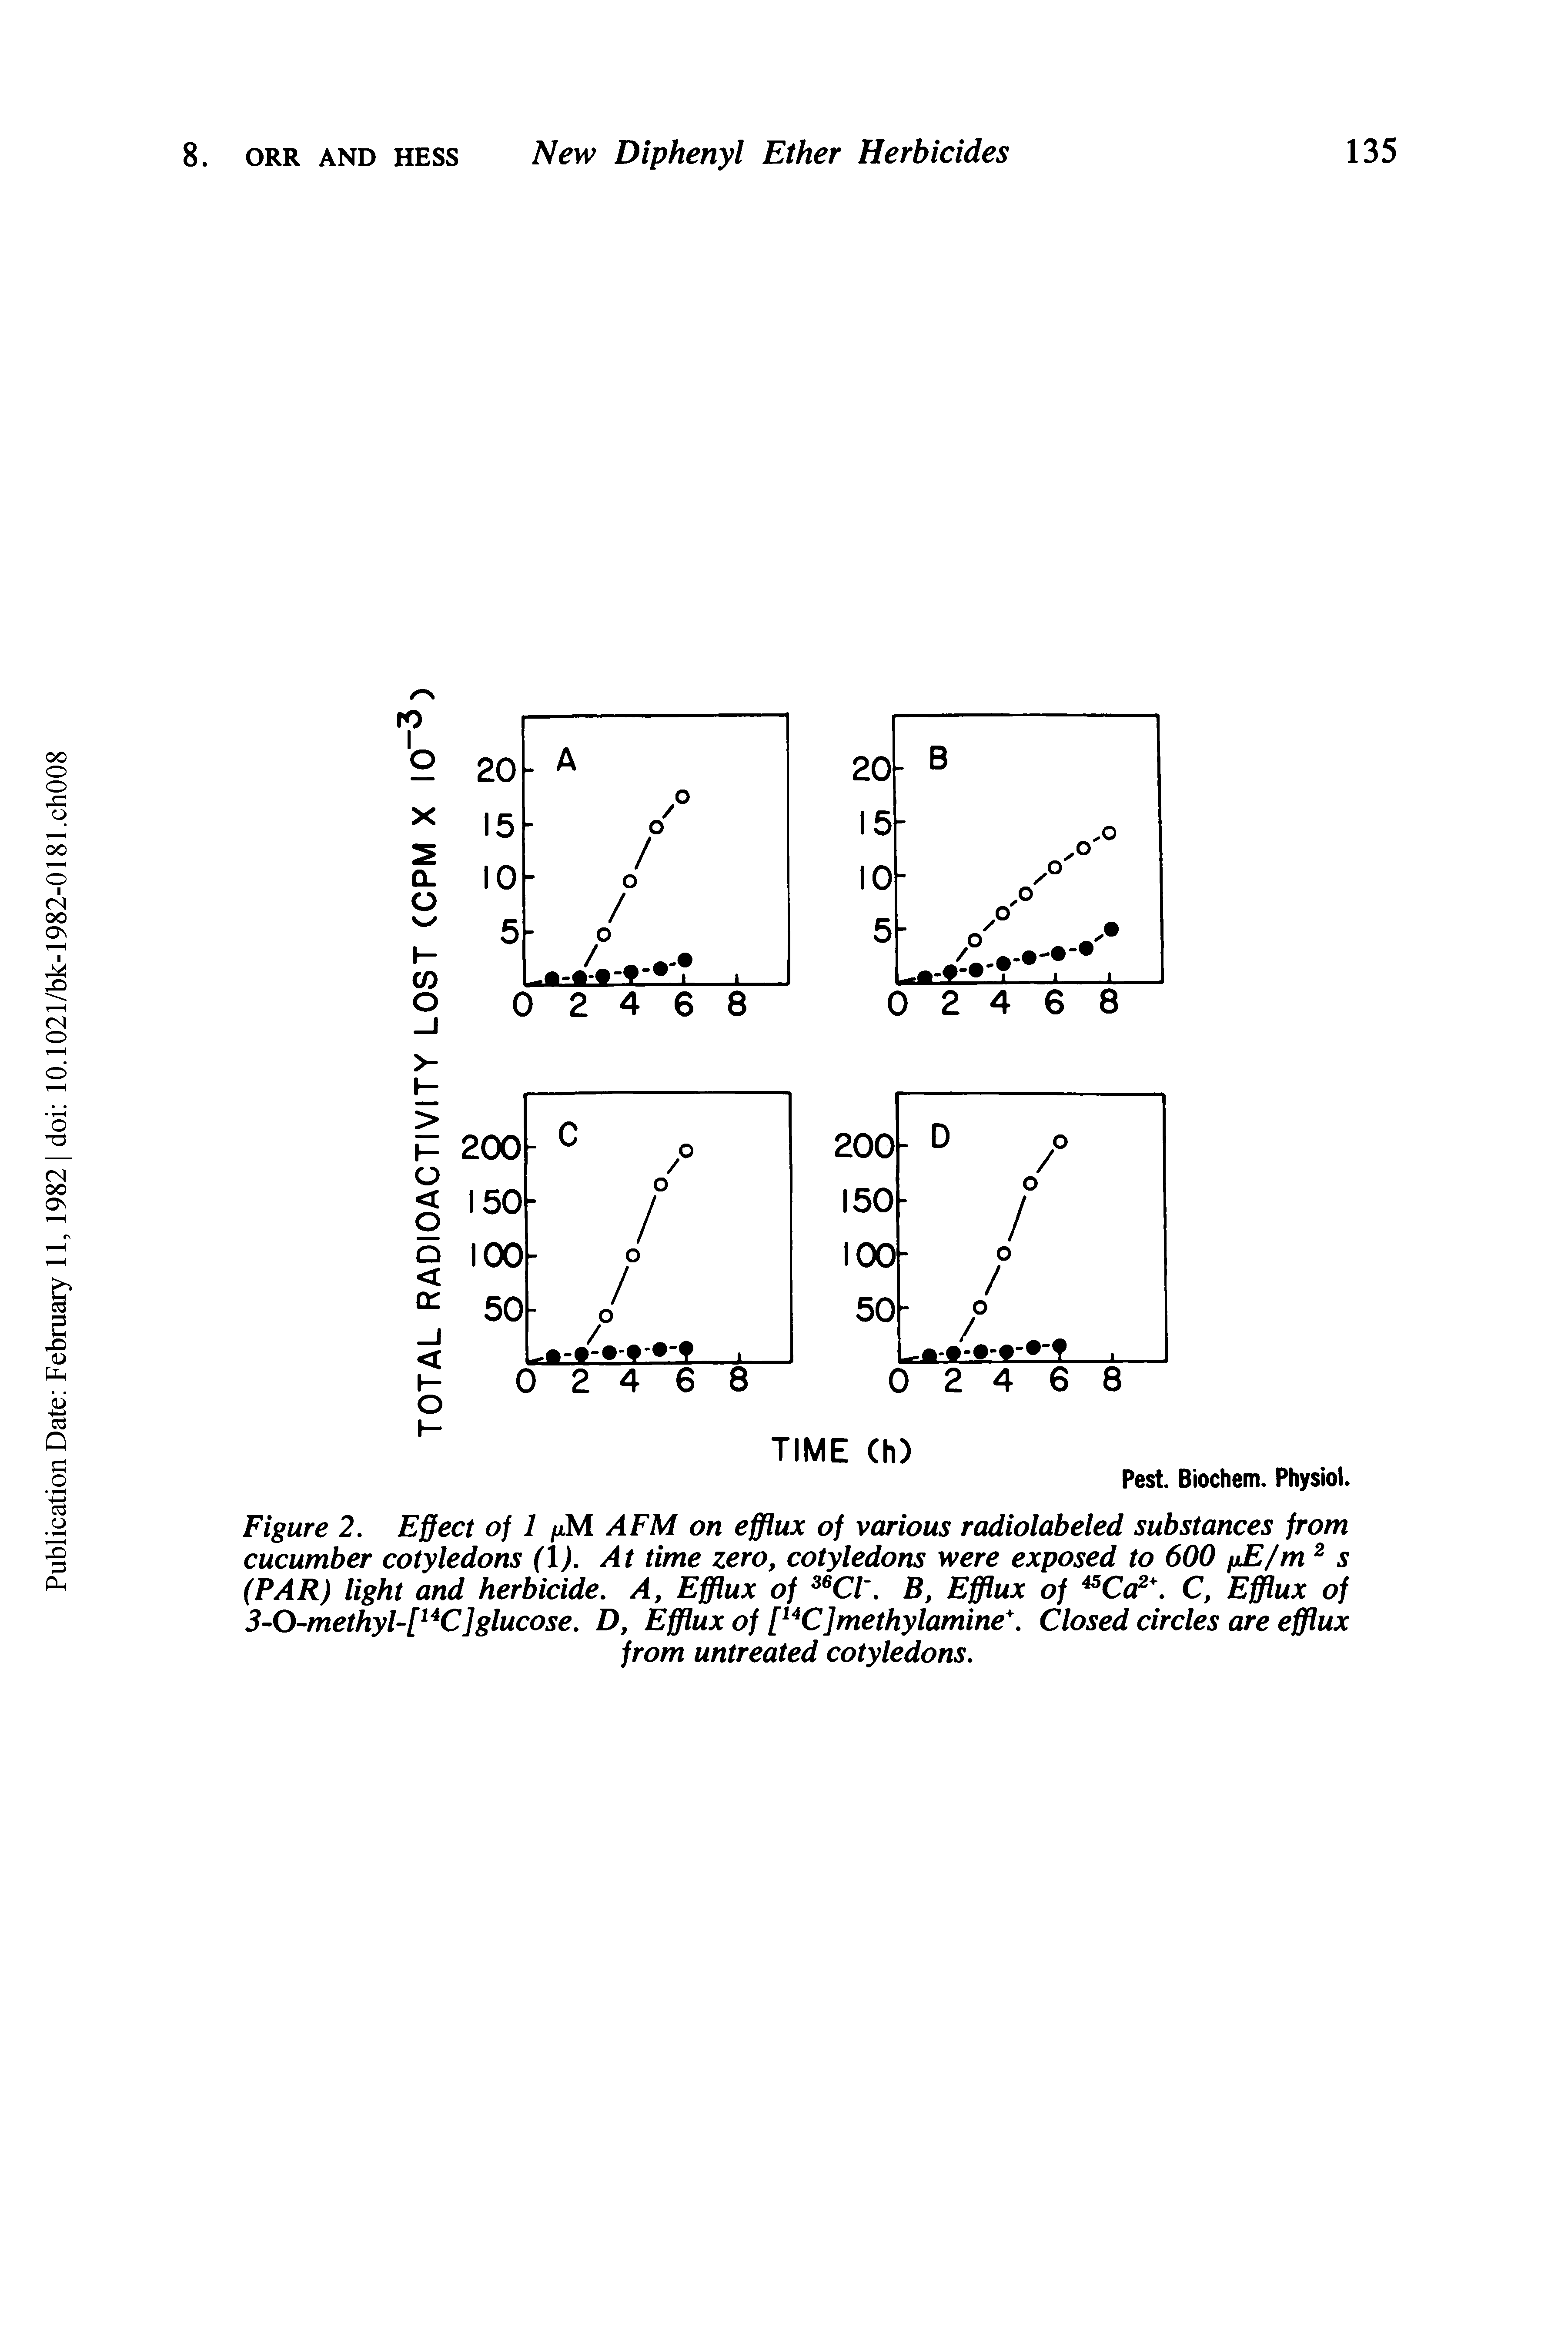 Figure 2. Effect of 1 (xM AFM on efflux of various radiolabeled substances from cucumber cotyledons ( ). At time zero, cotyledons were exposed to 600 fiE/m s (PAR) light and herbicide. A, Efflux of Cl. B, Efflux of C, Efflux of...